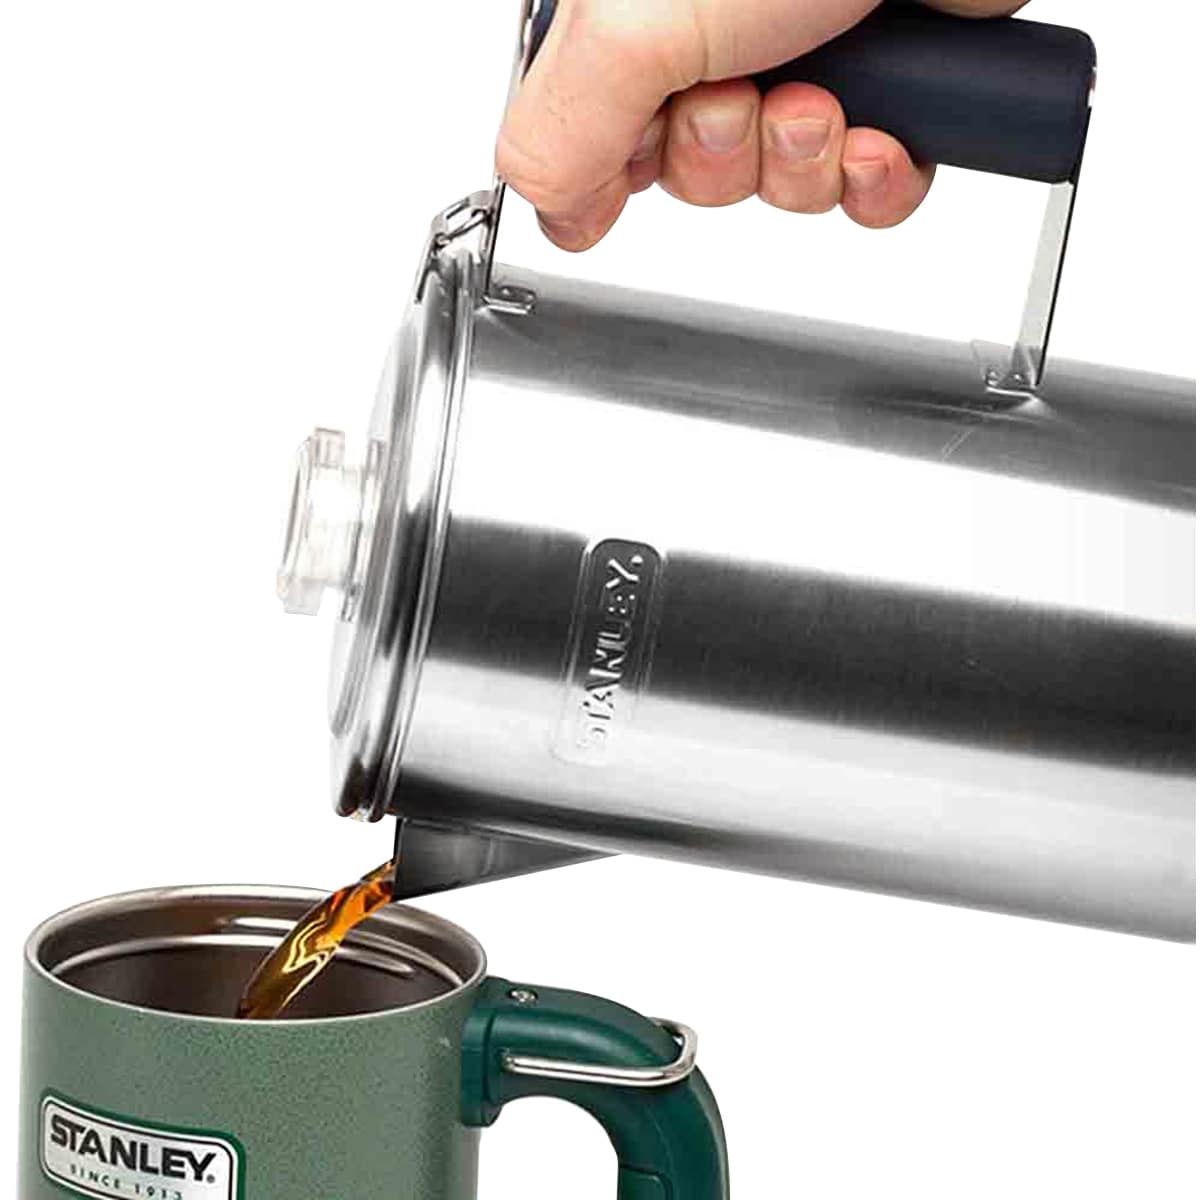 https://ak1.ostkcdn.com/images/products/is/images/direct/00e4e90b1b9120fba1e573b6f5e90d0241191aa7/Stanley-Adventure-1.1-qt.-Stainless-Steel-Percolator-Coffee-Pot.jpg